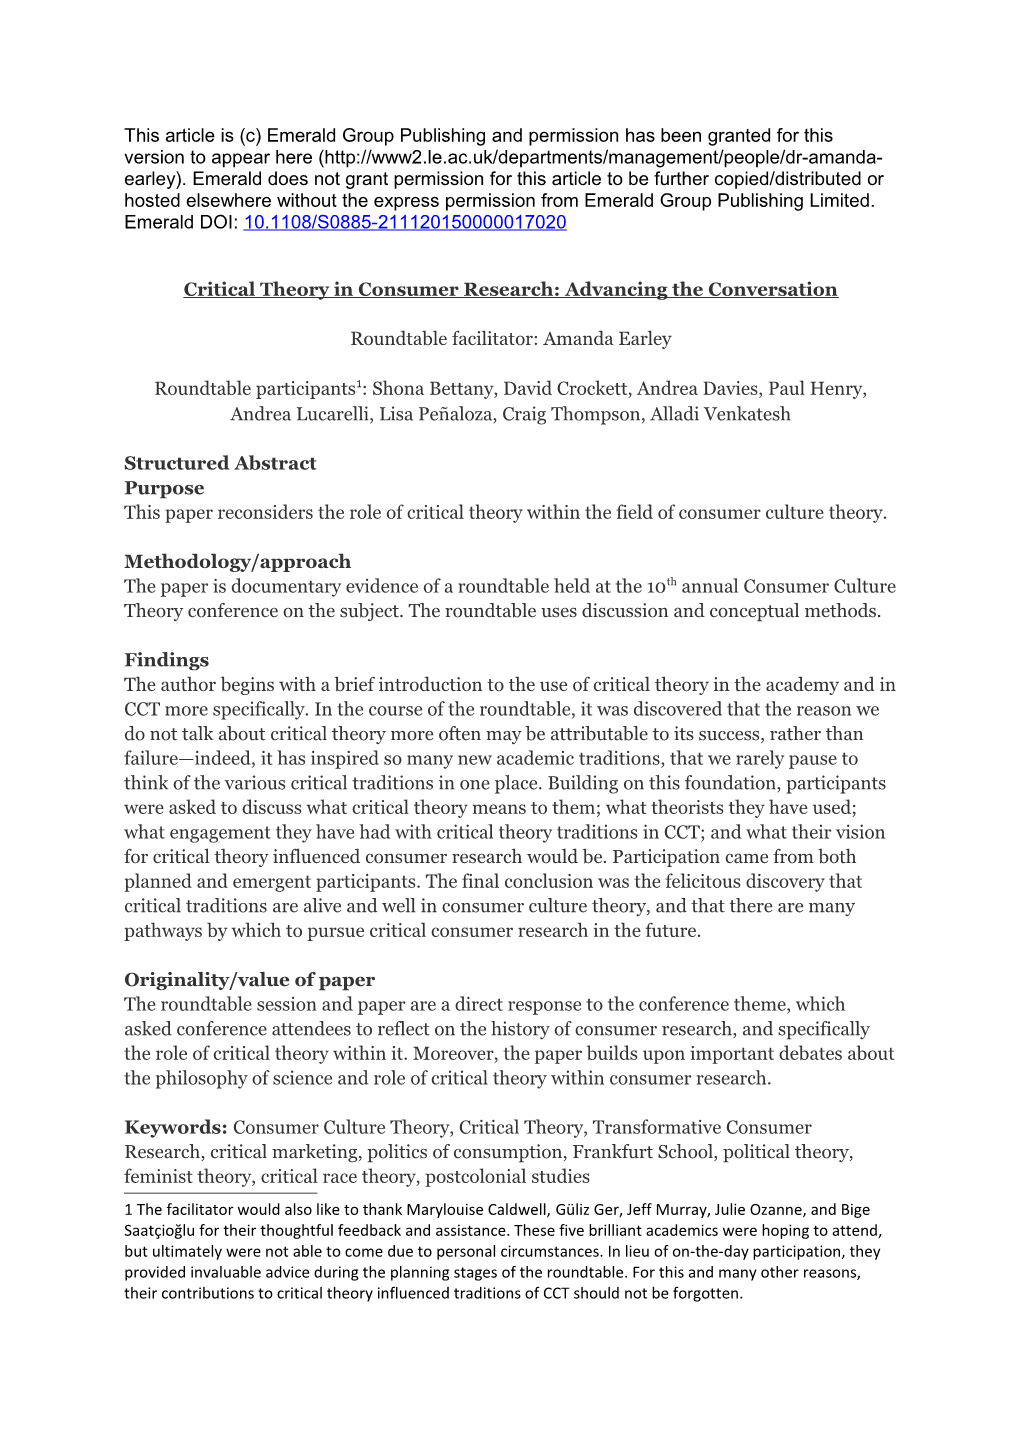 Critical Theory in Consumer Research: Advancing the Conversation